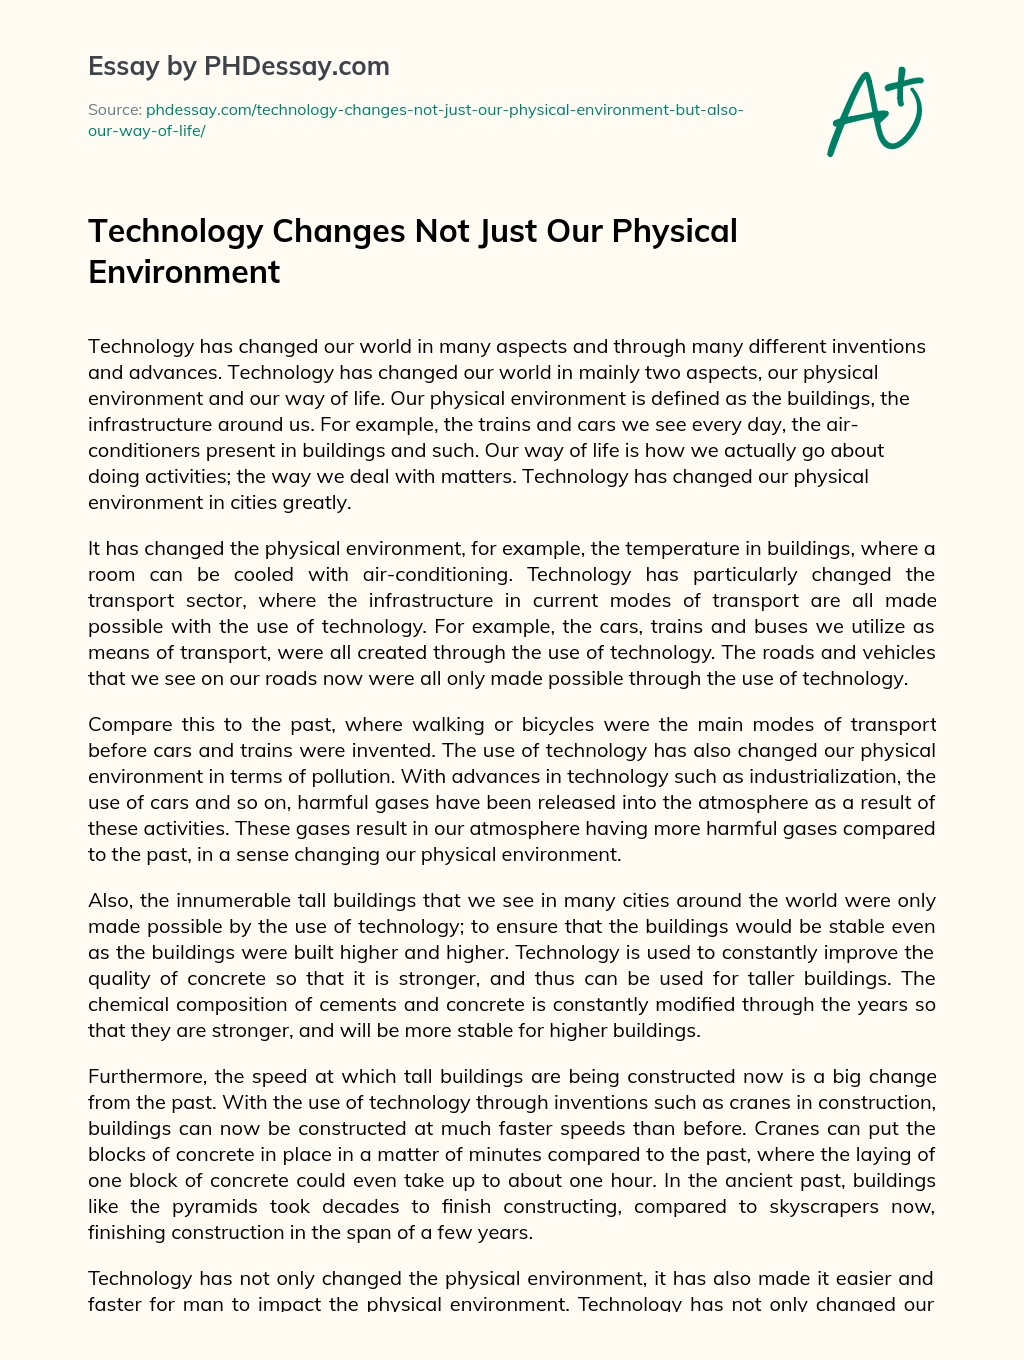 Technology Changes Not Just Our Physical Environment essay